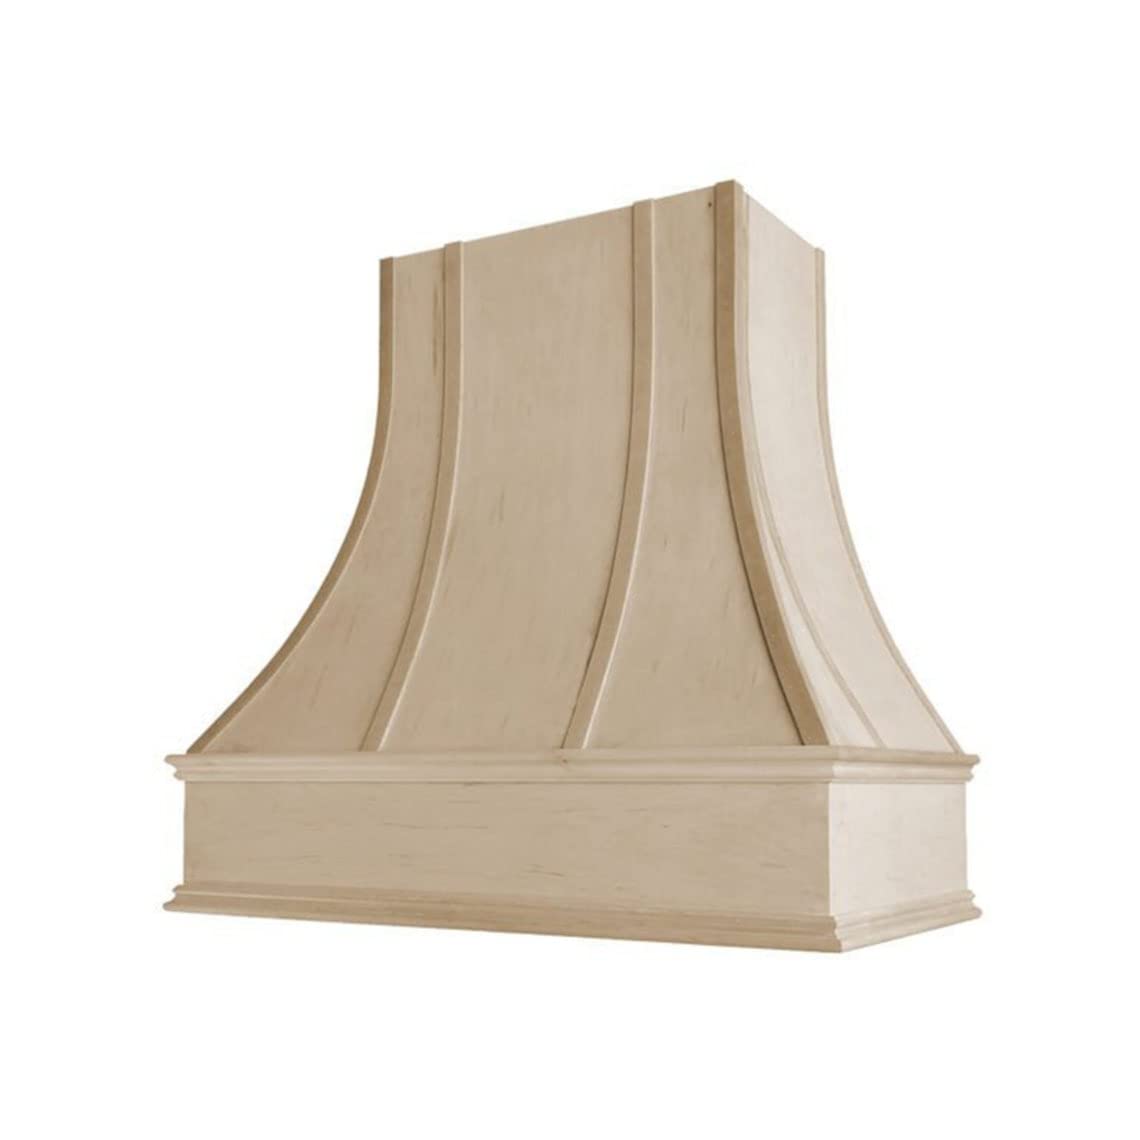 Riley & Higgs Curved Front Unfinished Range Hood Cover With Decorative Molding